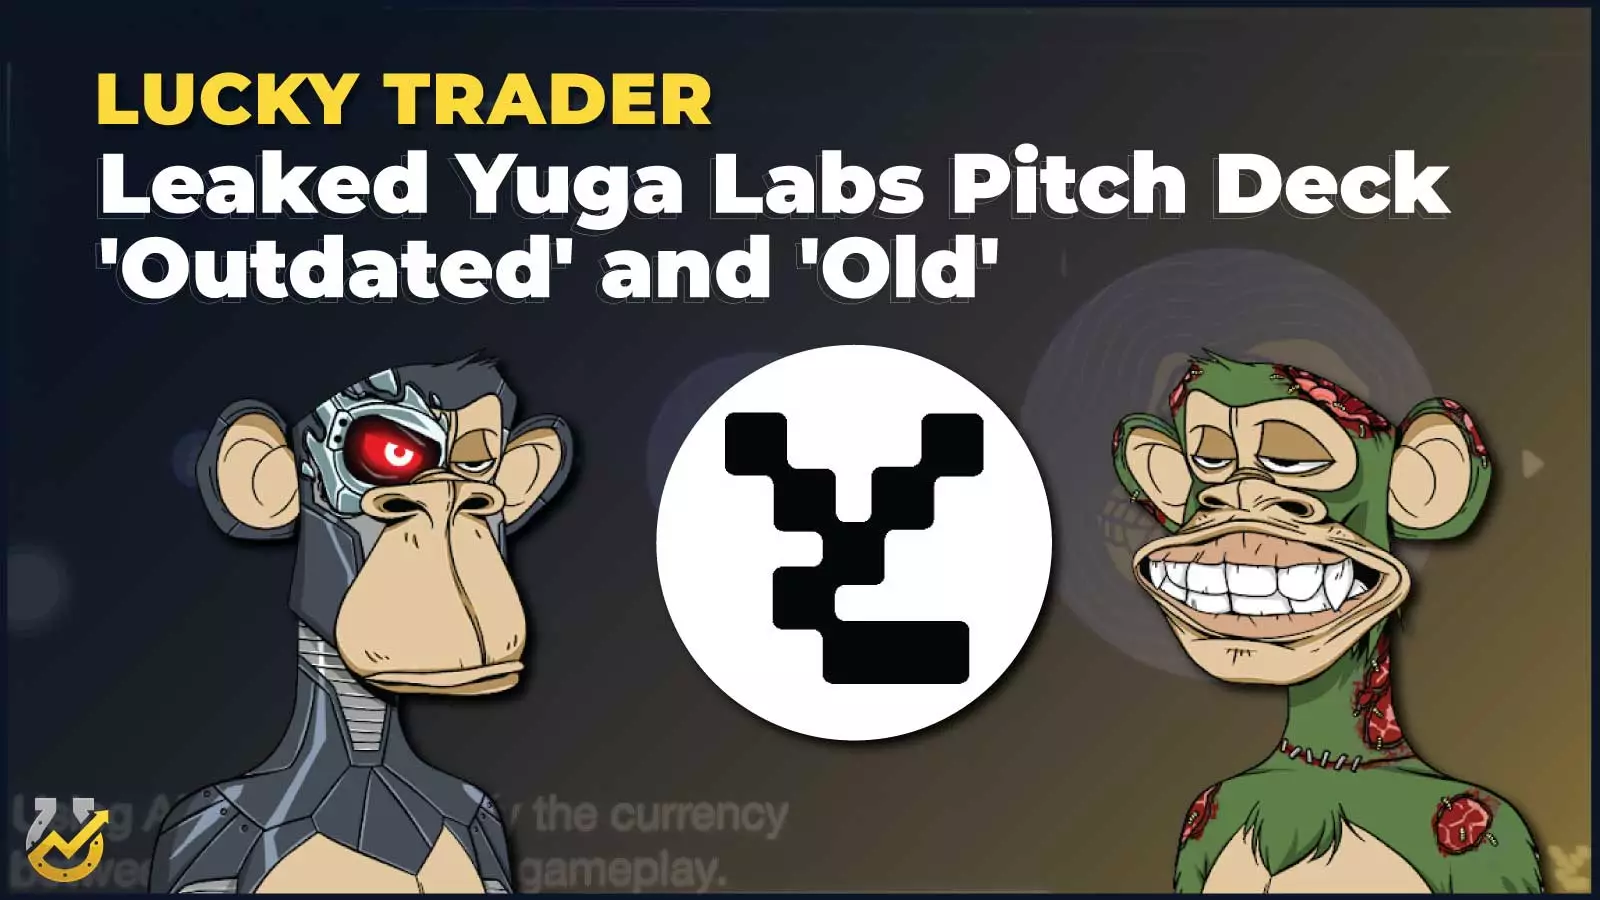 Leaked Yuga Labs Pitch Deck 'Outdated' and 'Old'